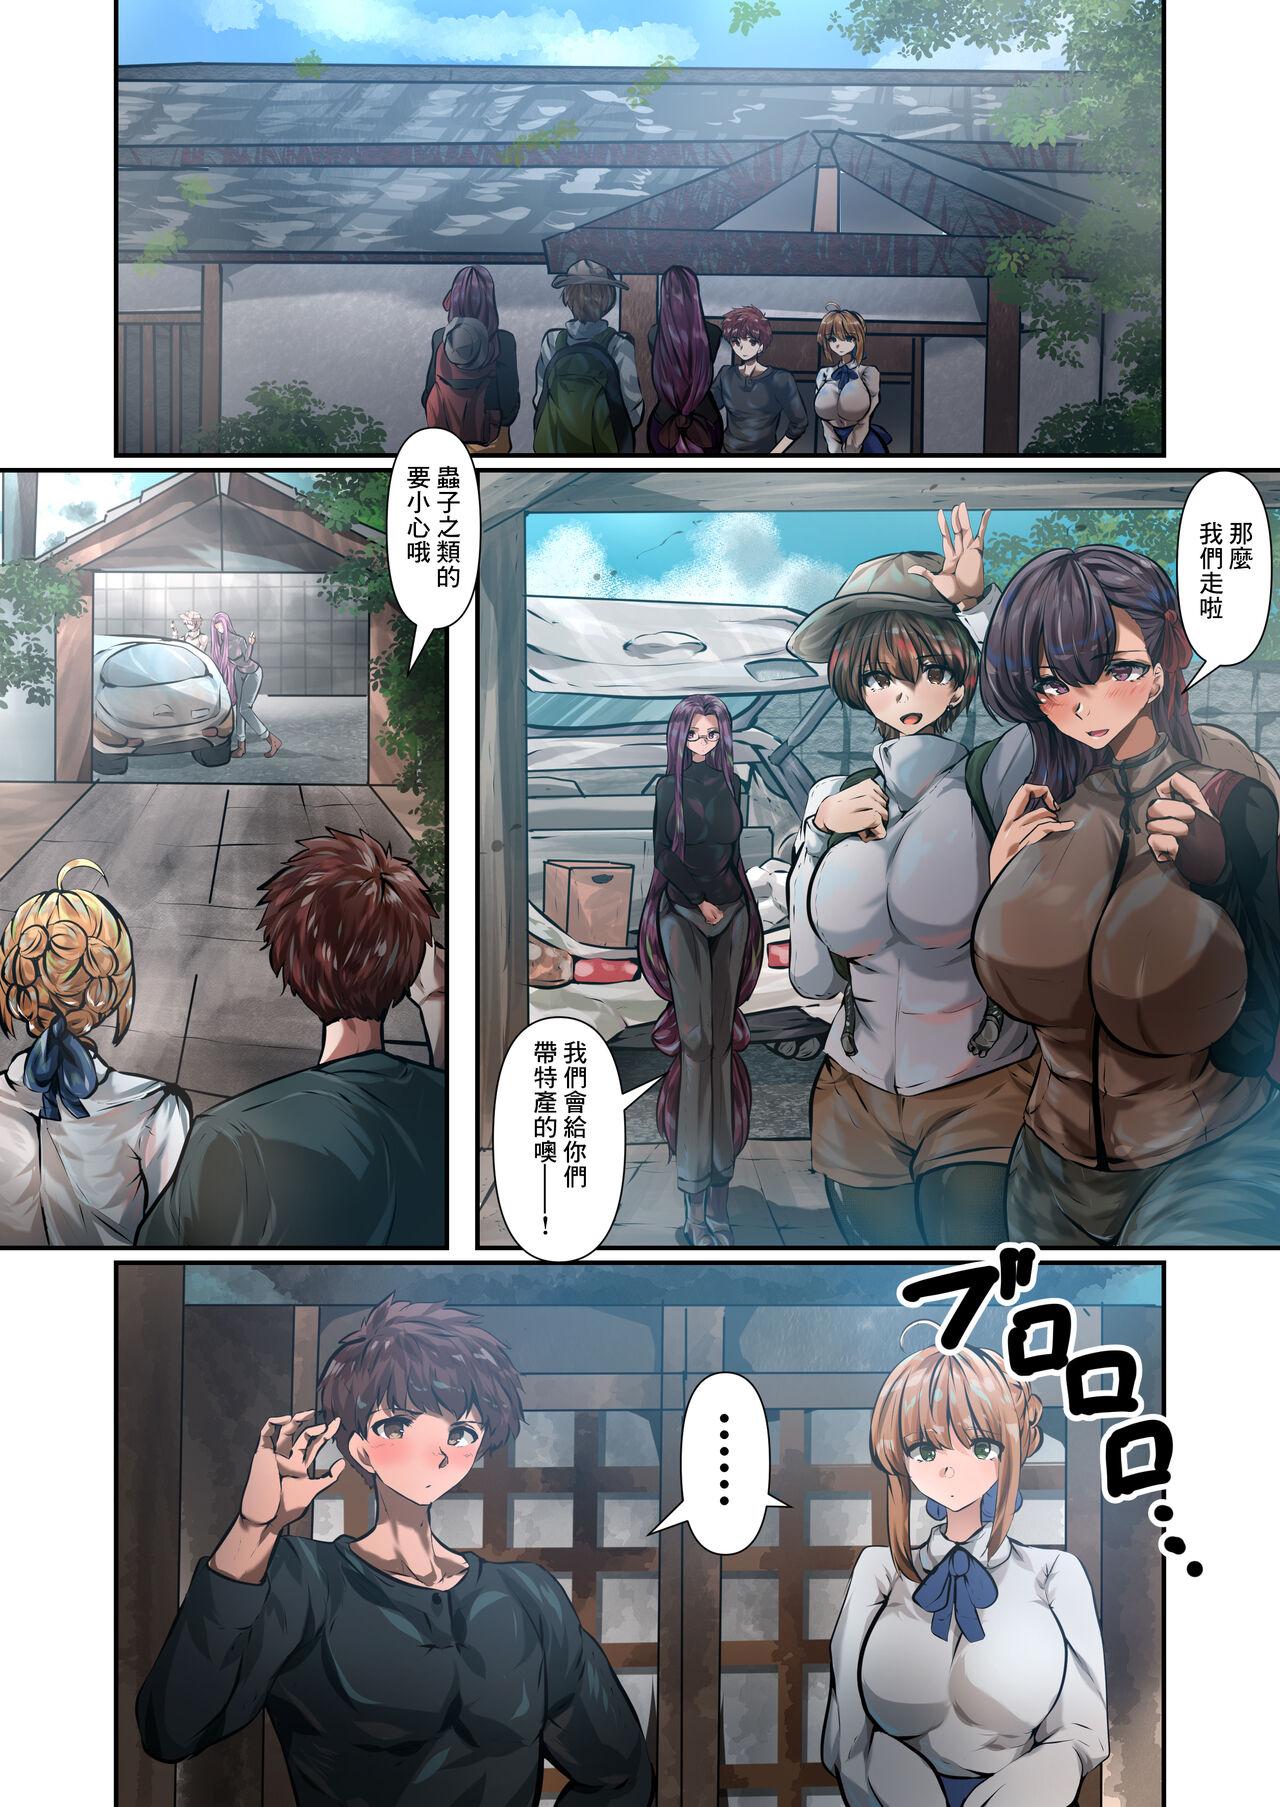 Bulge 士剣 - Fate stay night Slapping - Page 2